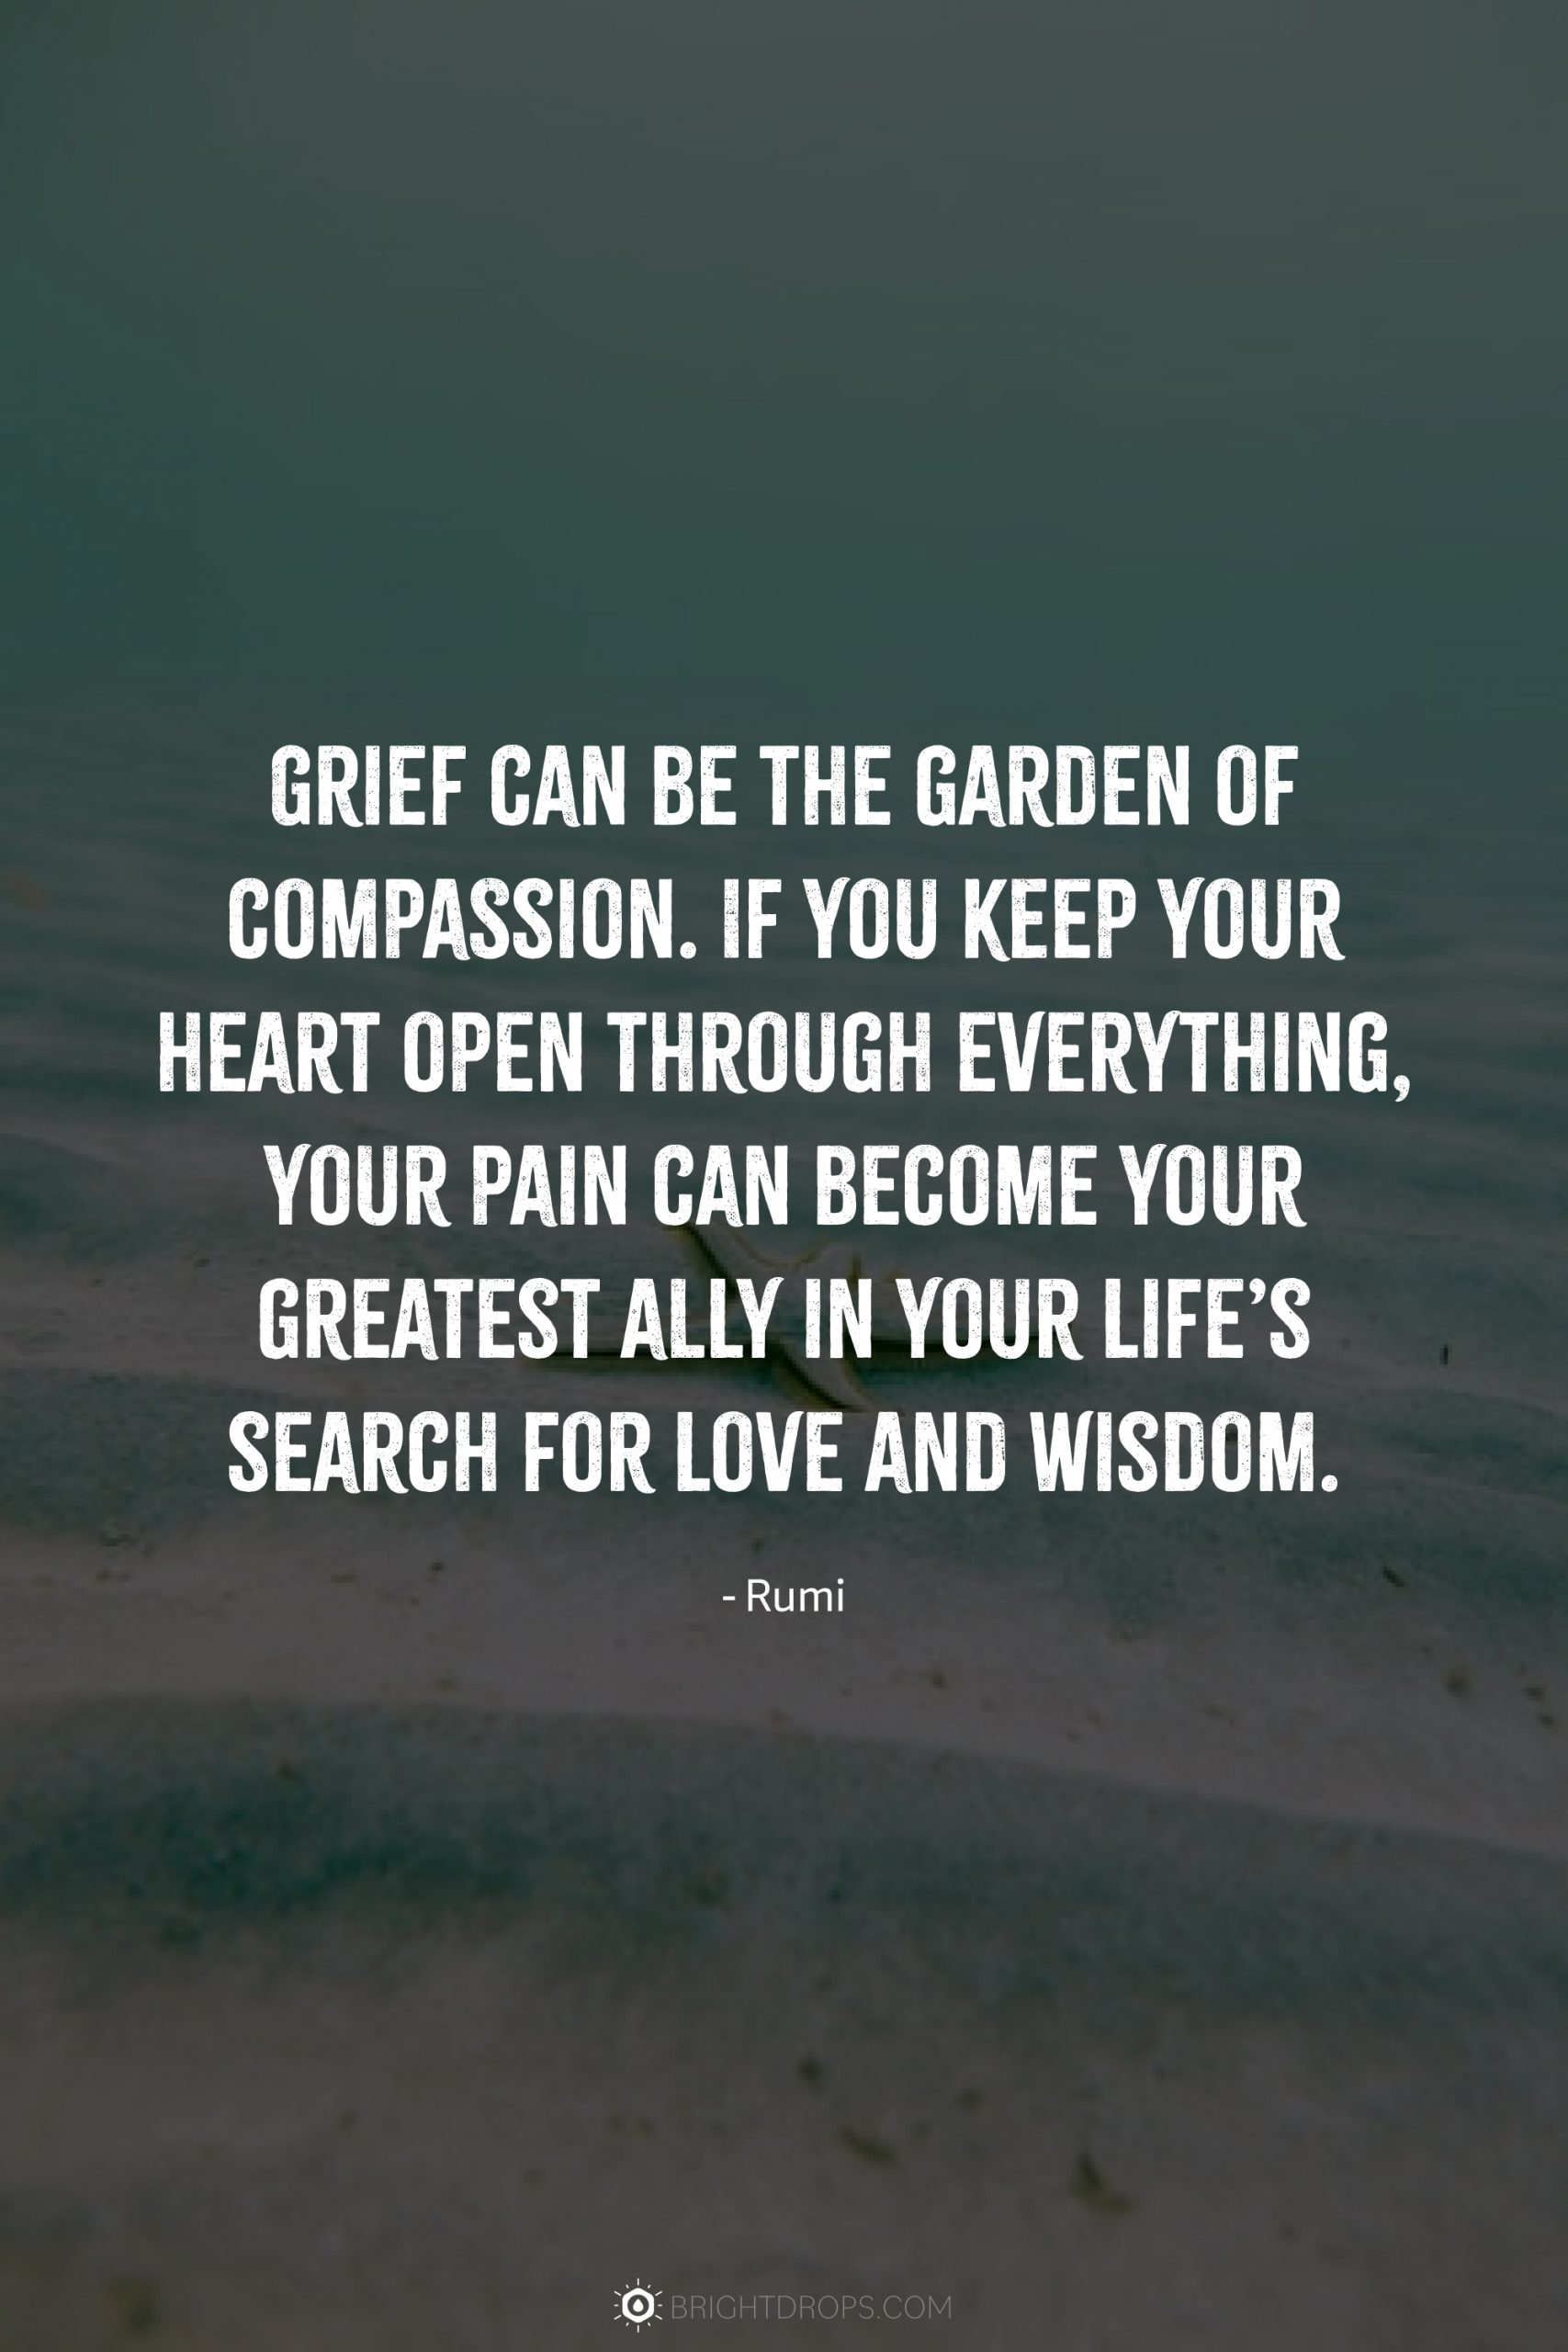 Grief can be the garden of compassion. If you keep your heart open through everything, your pain can become your greatest ally in your life’s search for love and wisdom.